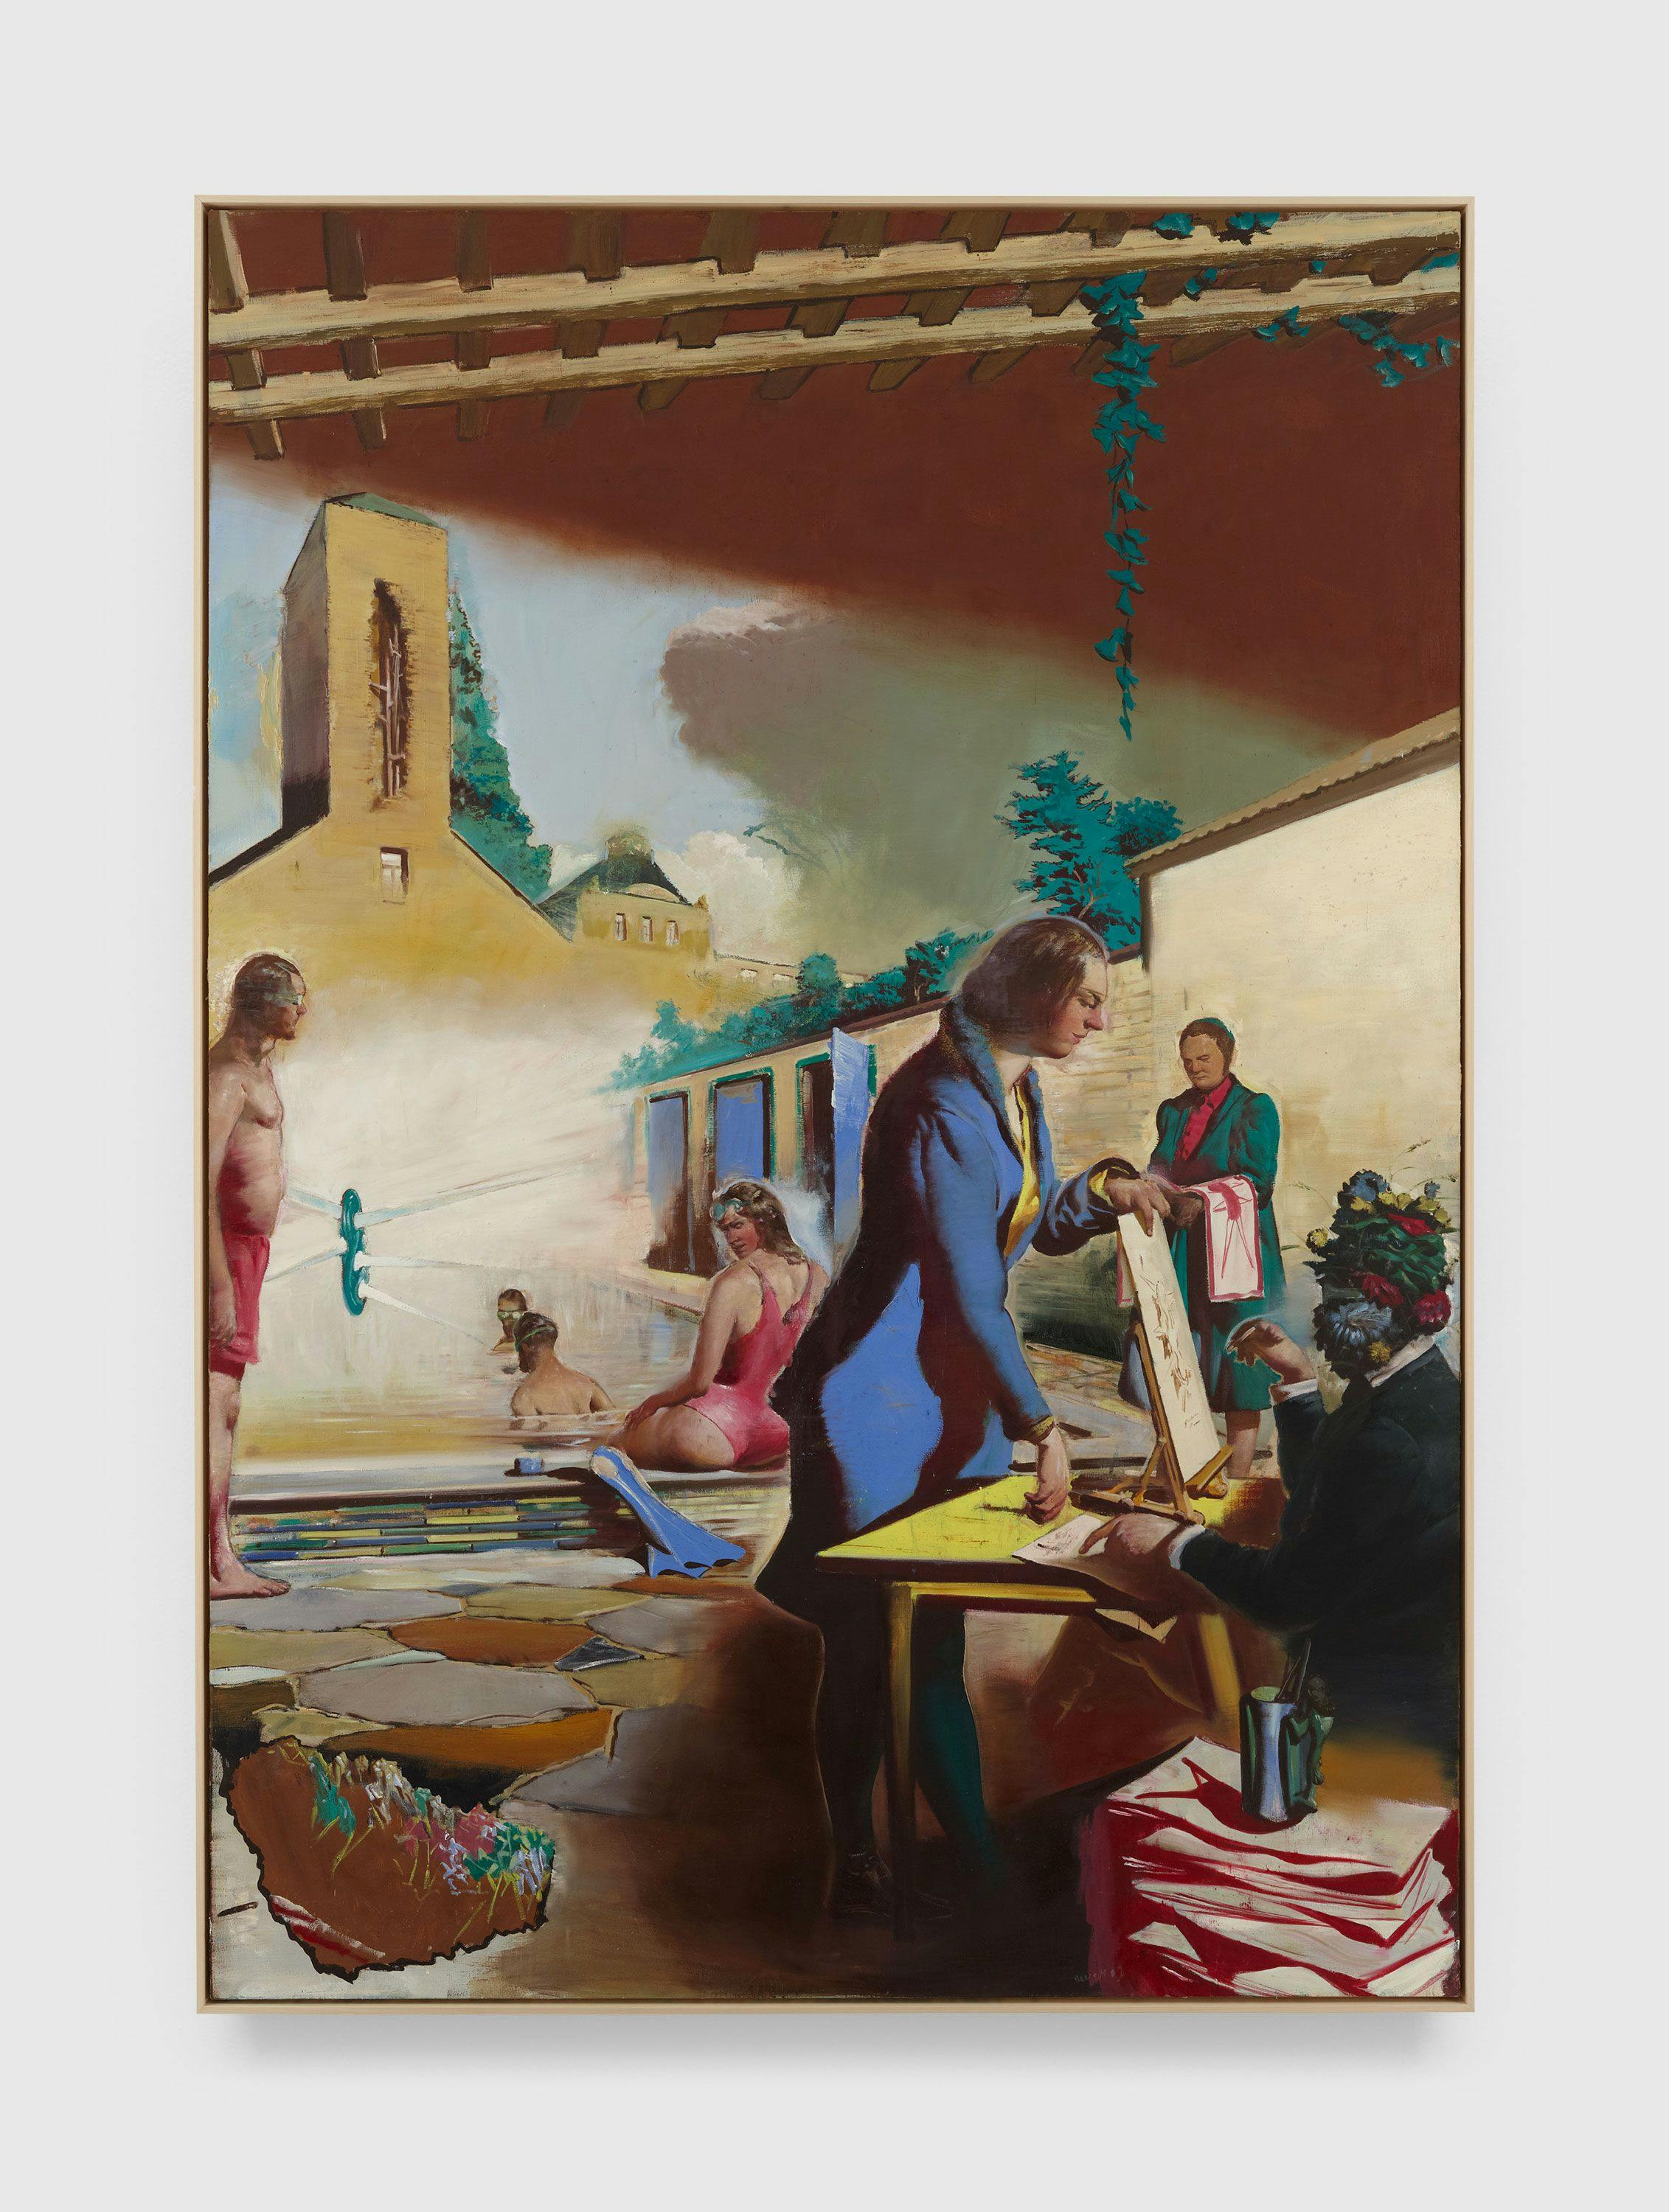 A painting by Neo Rauch, titled Gutachter, dated 2009.